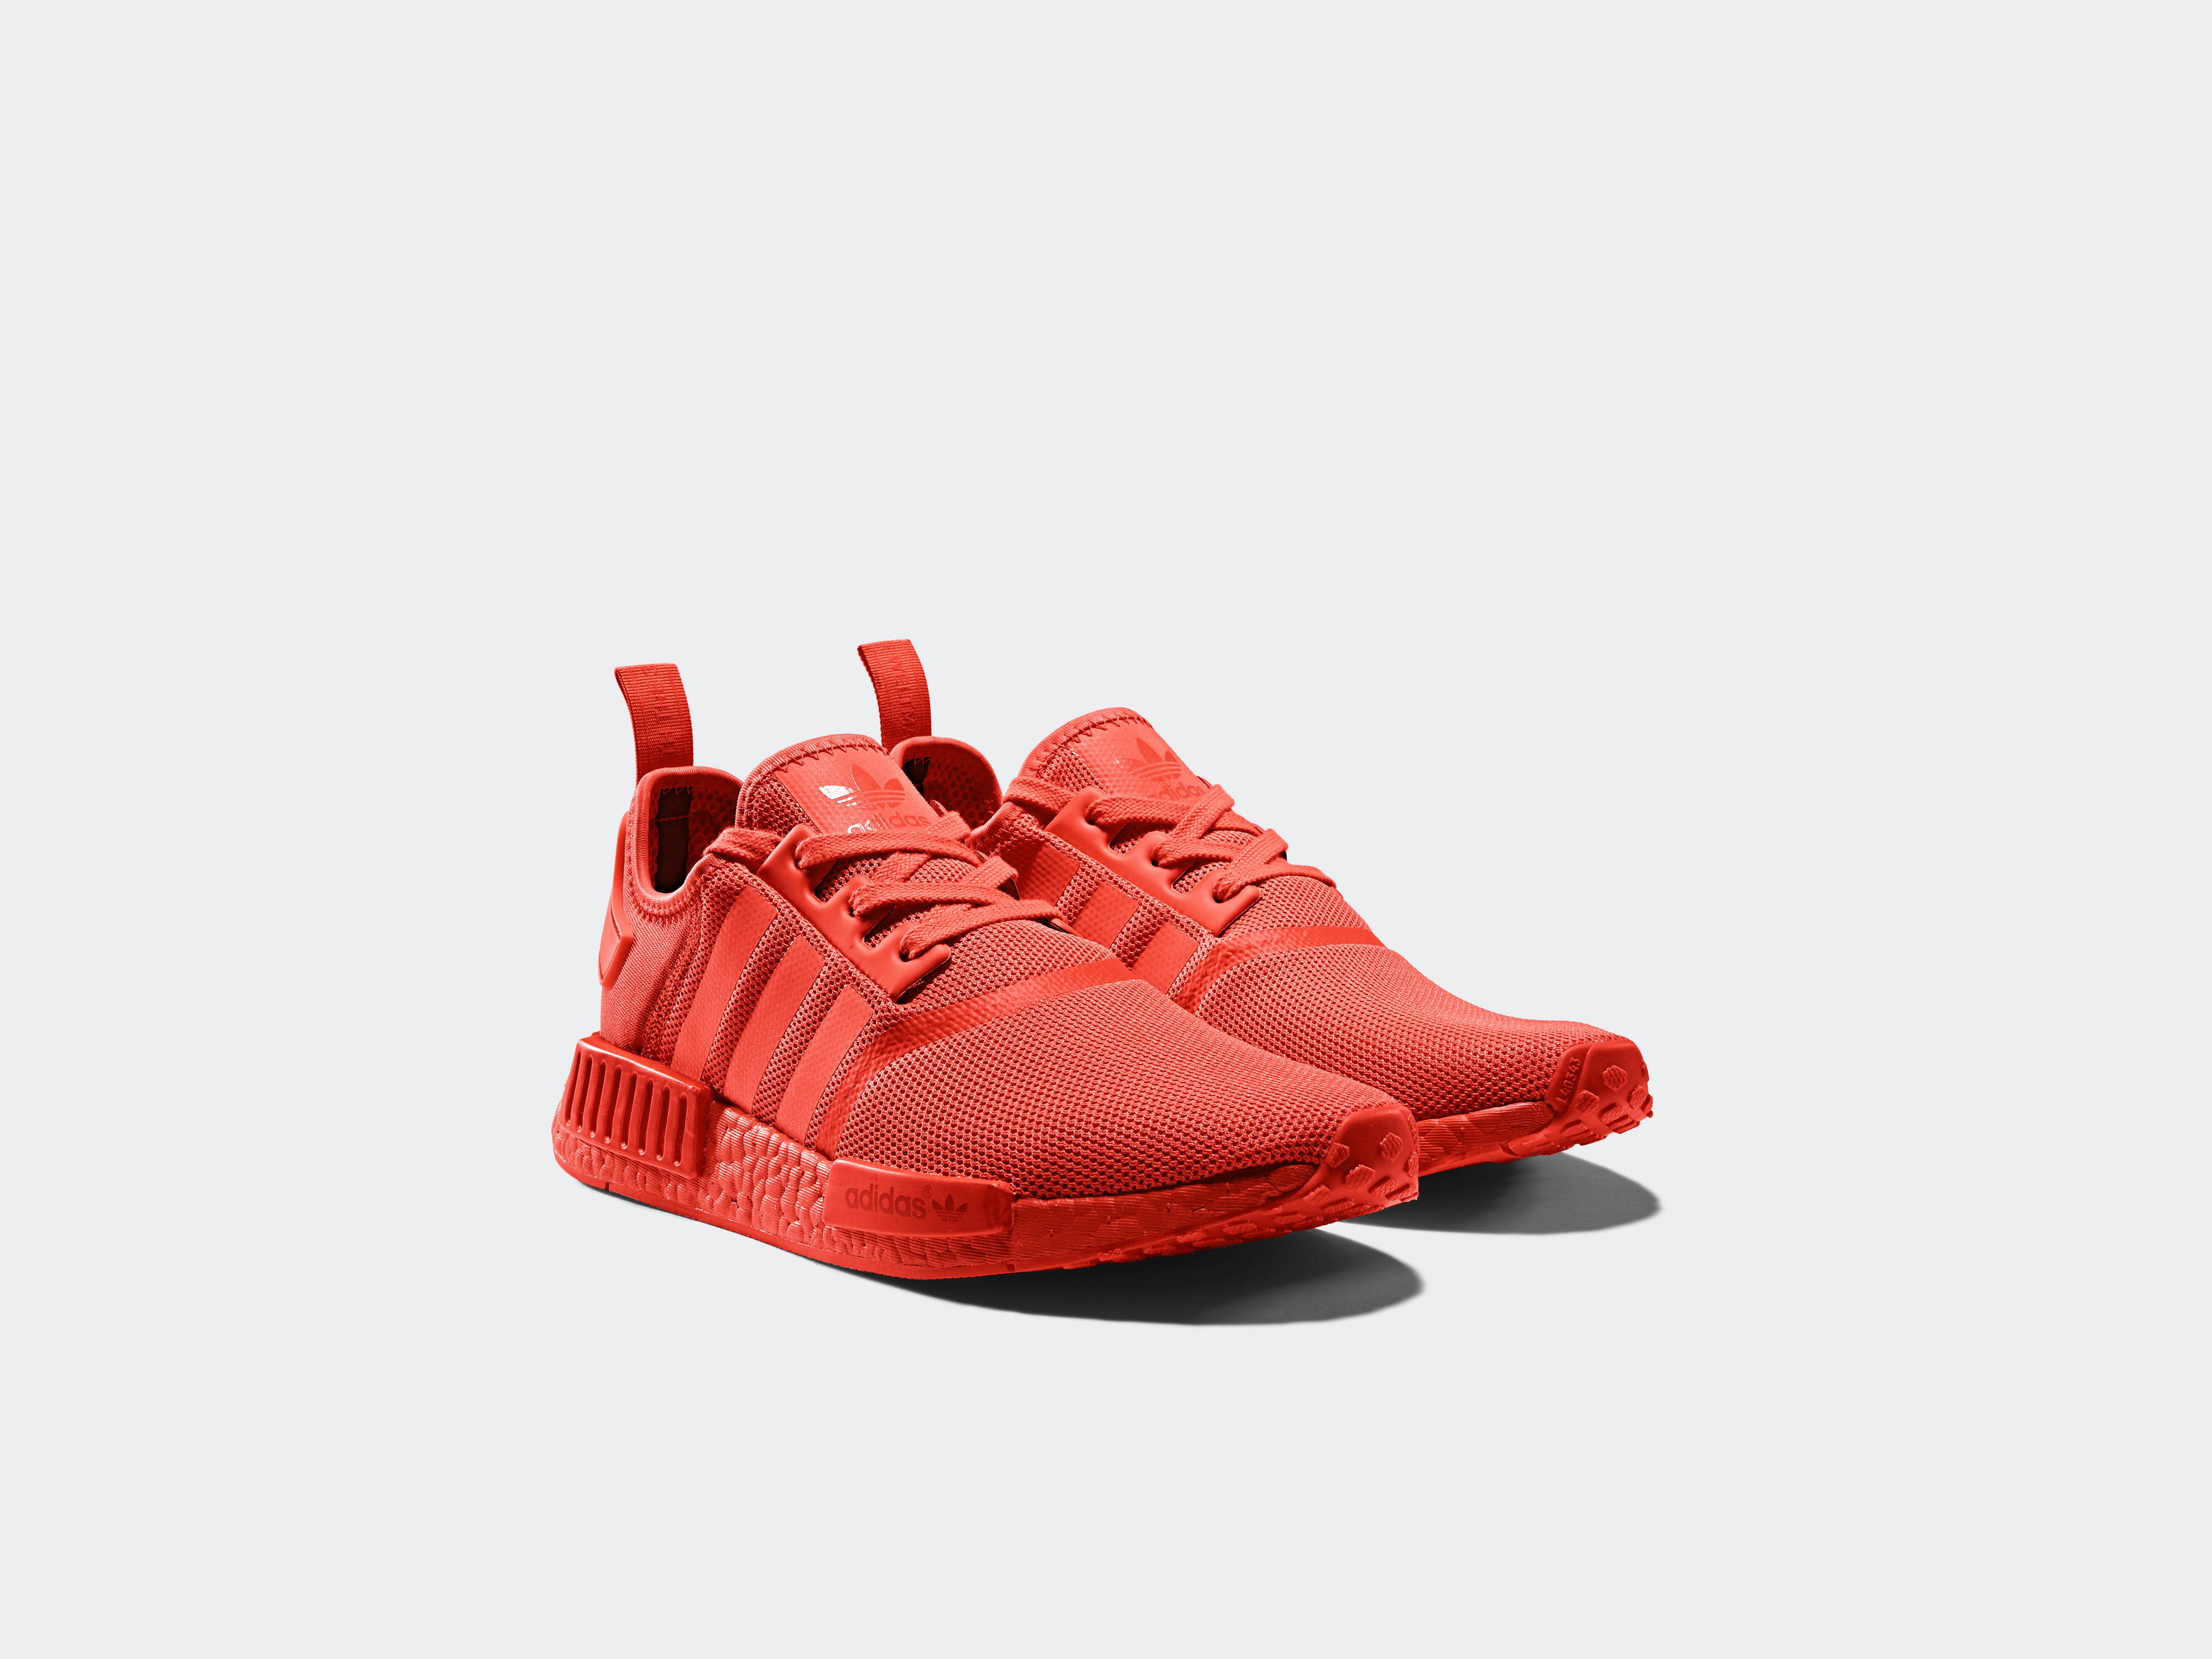 adidas nmd_r1 monochrome in red